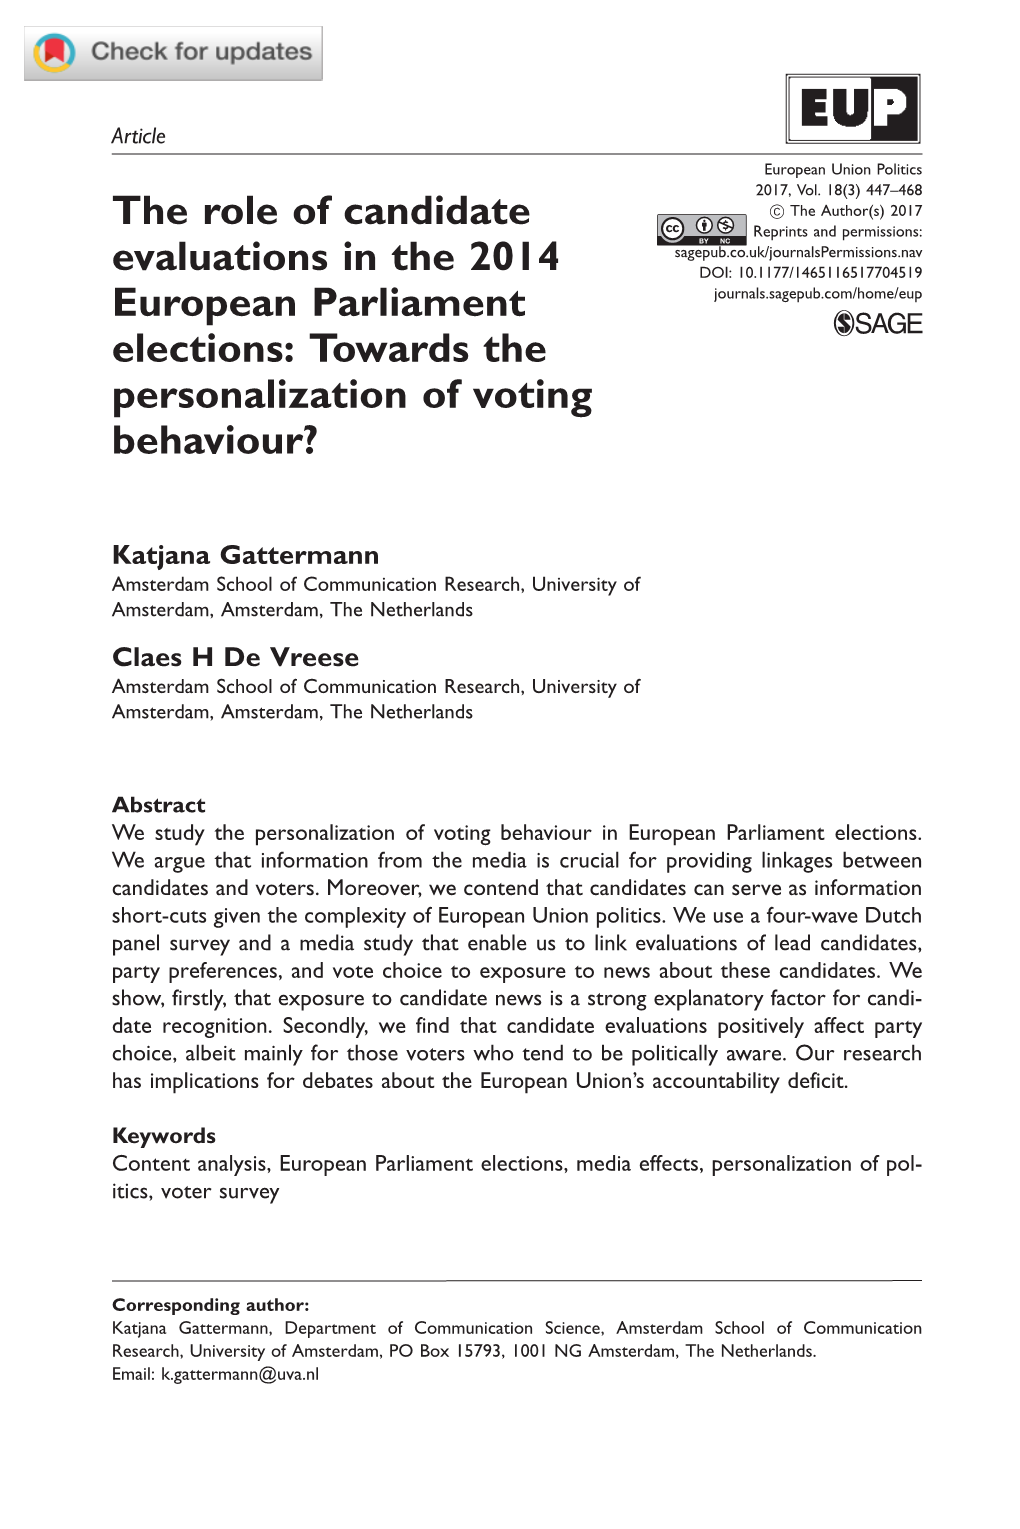 The Role of Candidate Evaluations in the 2014 European Parliament